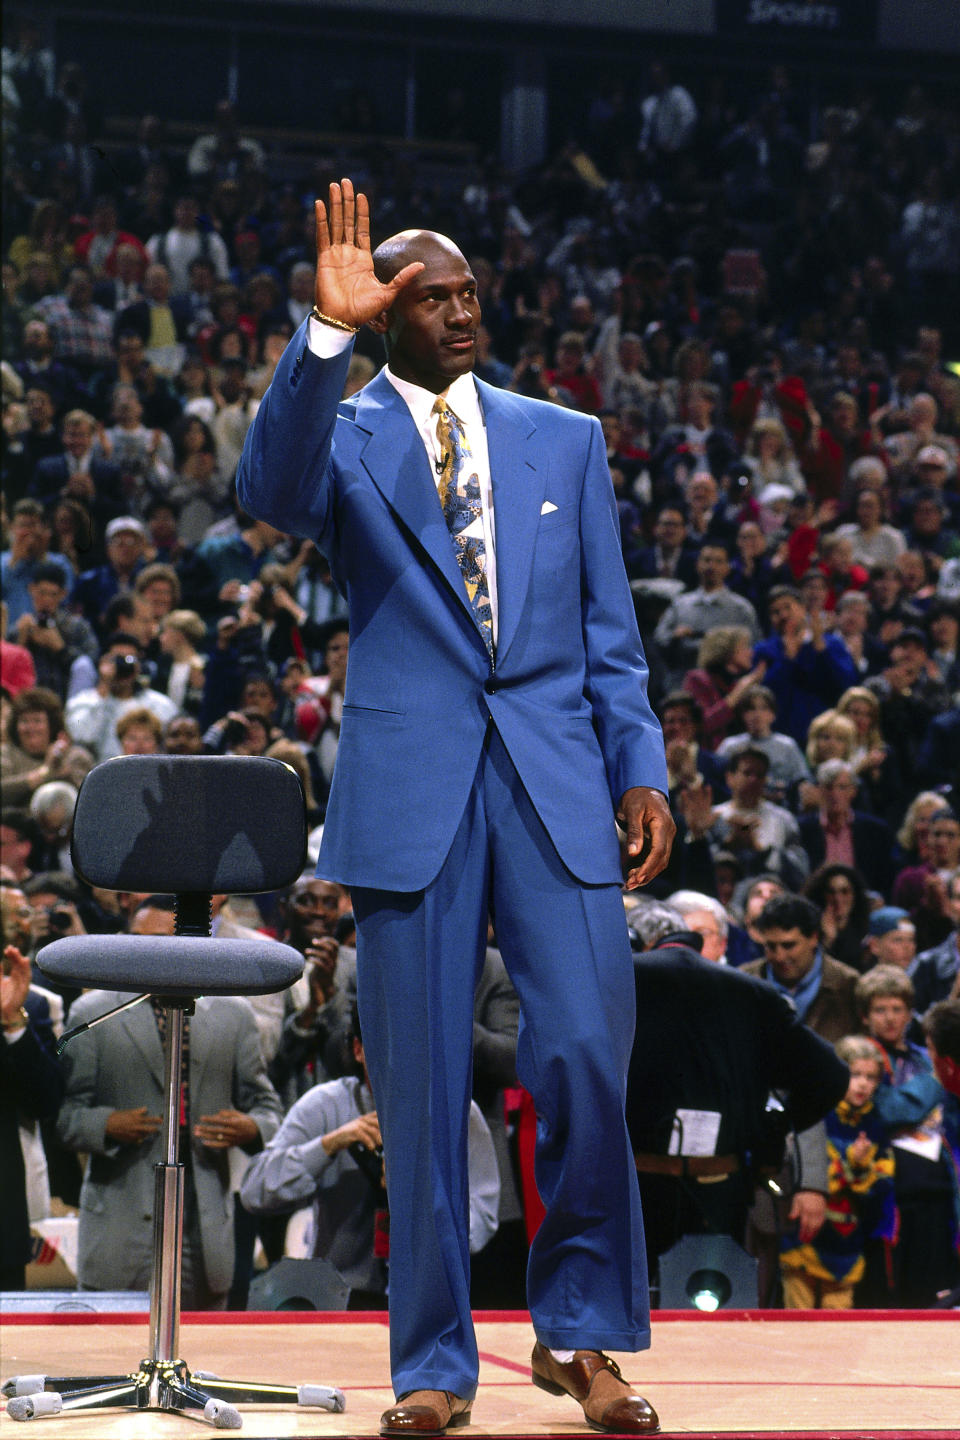 Michael Jordan waves to the crowd during his jersey retirement on November 1, 1994 at the United Center in Chicago, Illinois. (Photo by Nathaniel S. Butler/NBAE via Getty Images)